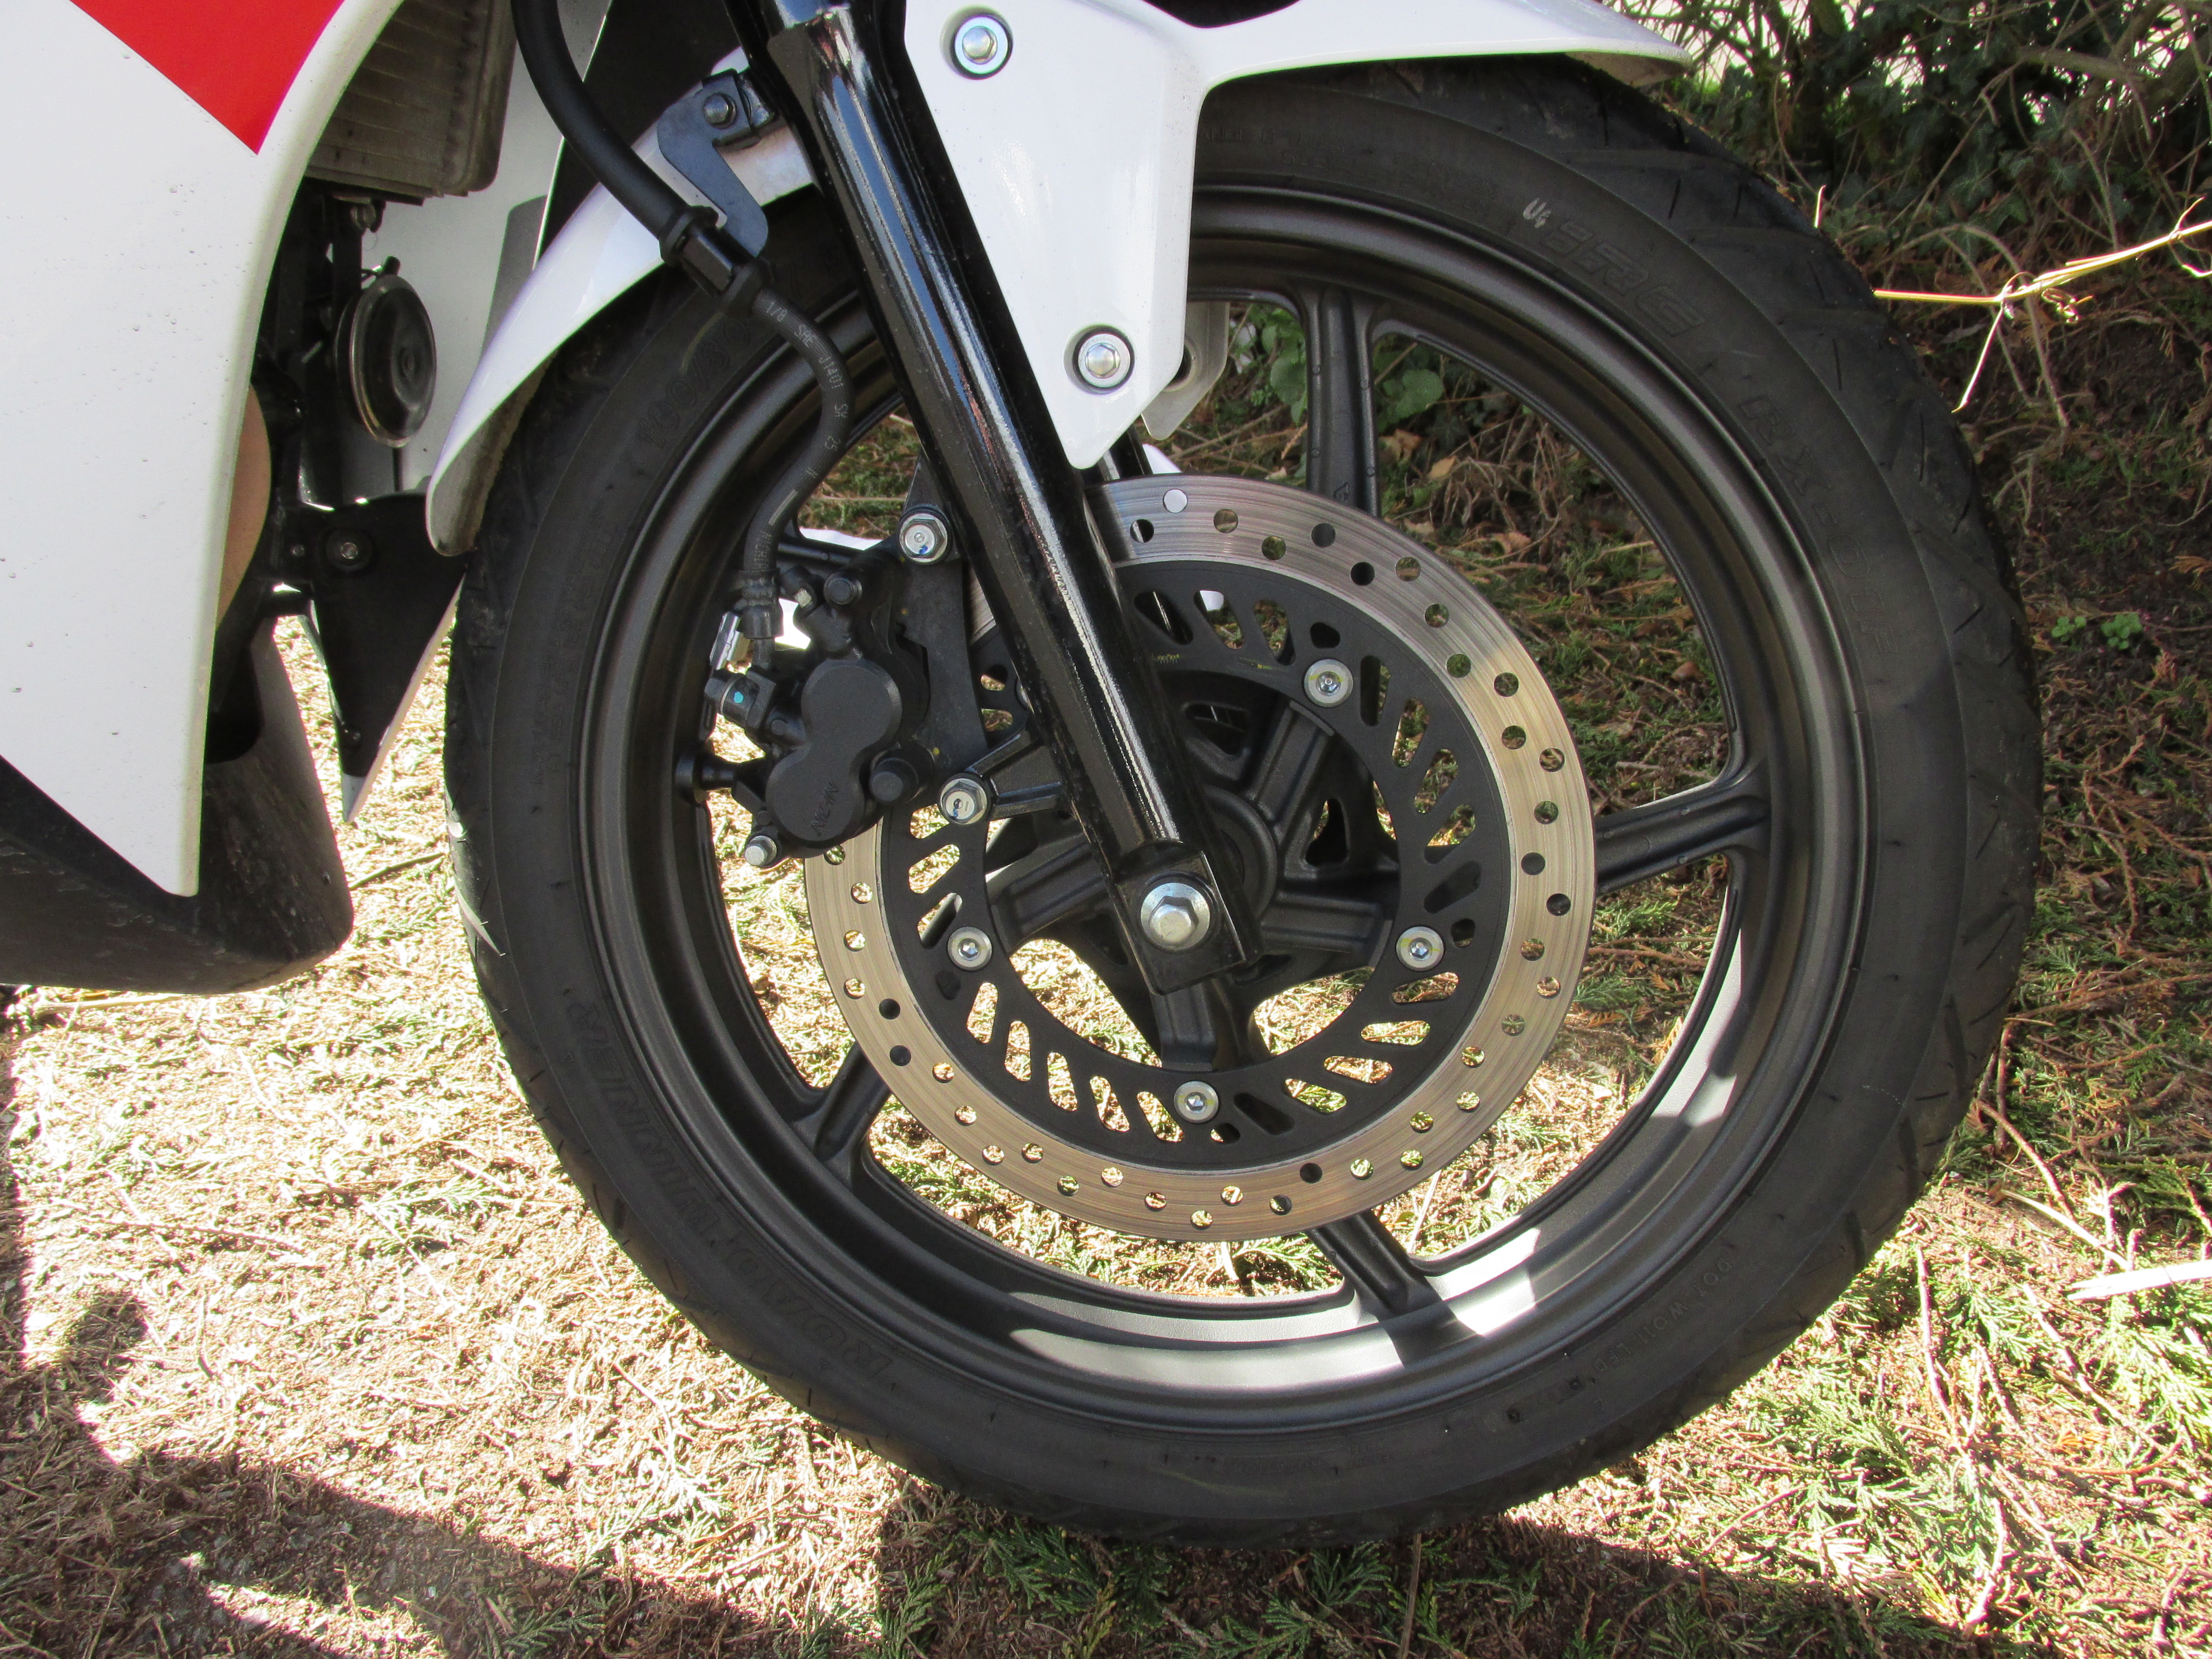 Review: One week with a Honda CBR125R